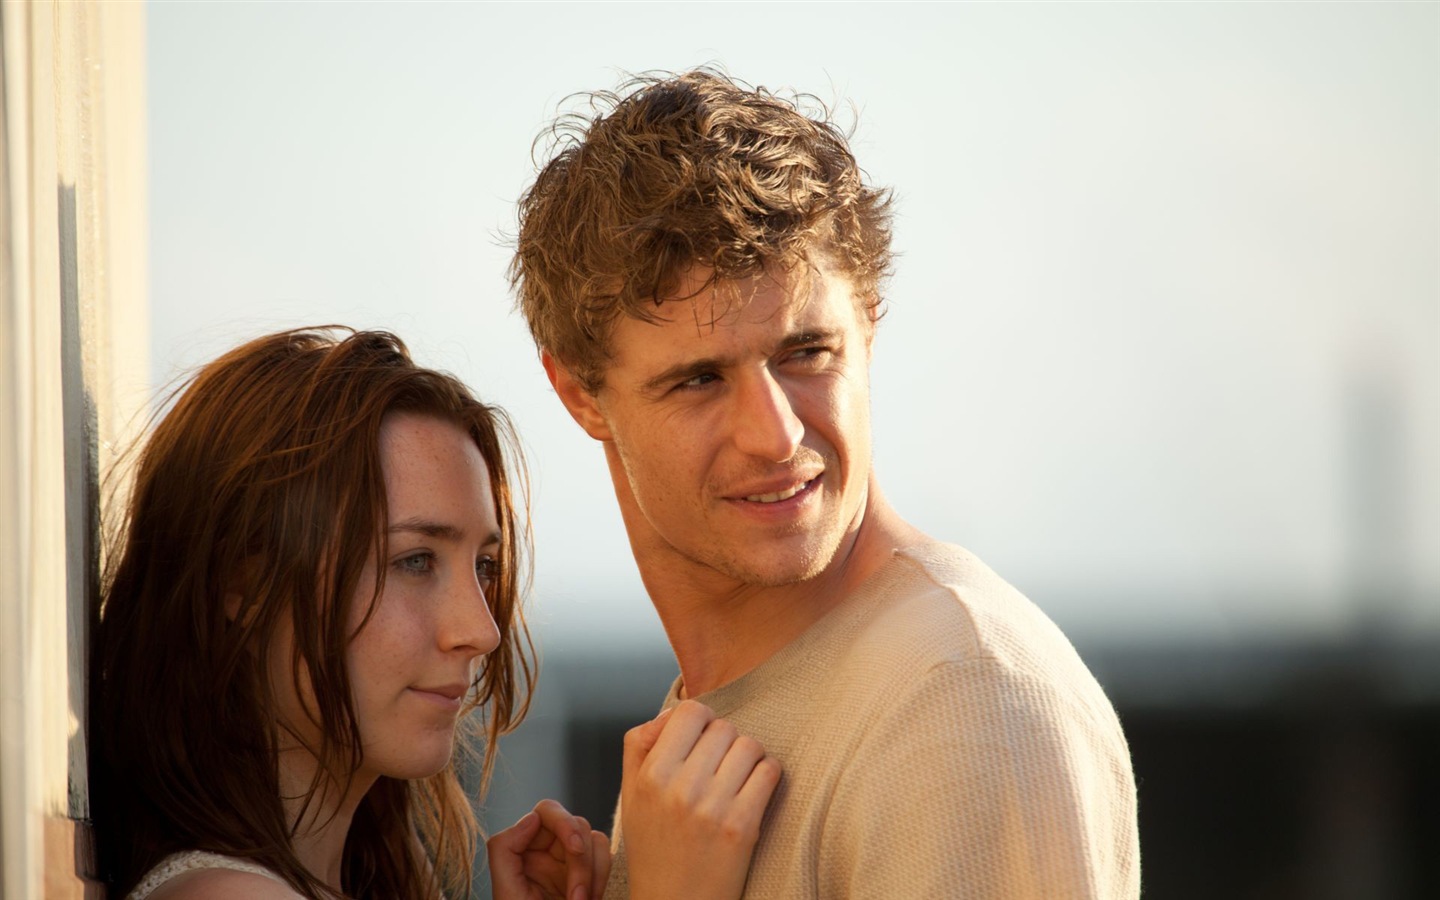 The Host 2013 movie HD wallpapers #9 - 1440x900